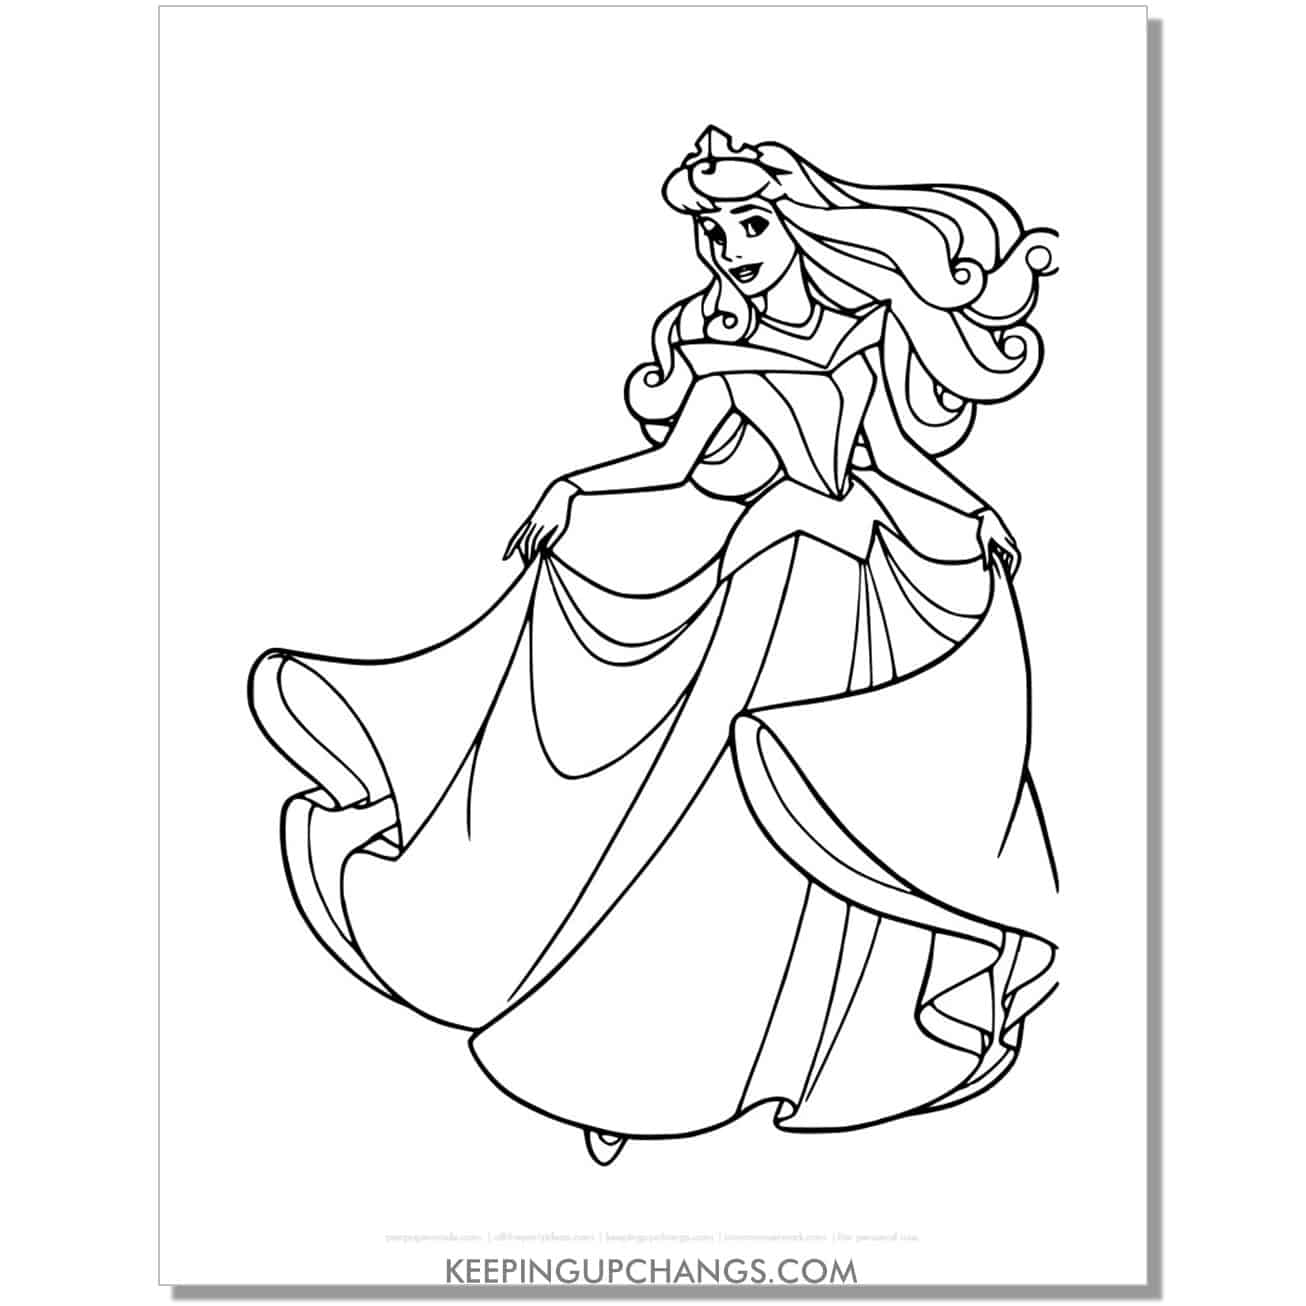 free aurora sleeping beauty in dress coloring page, sheet.